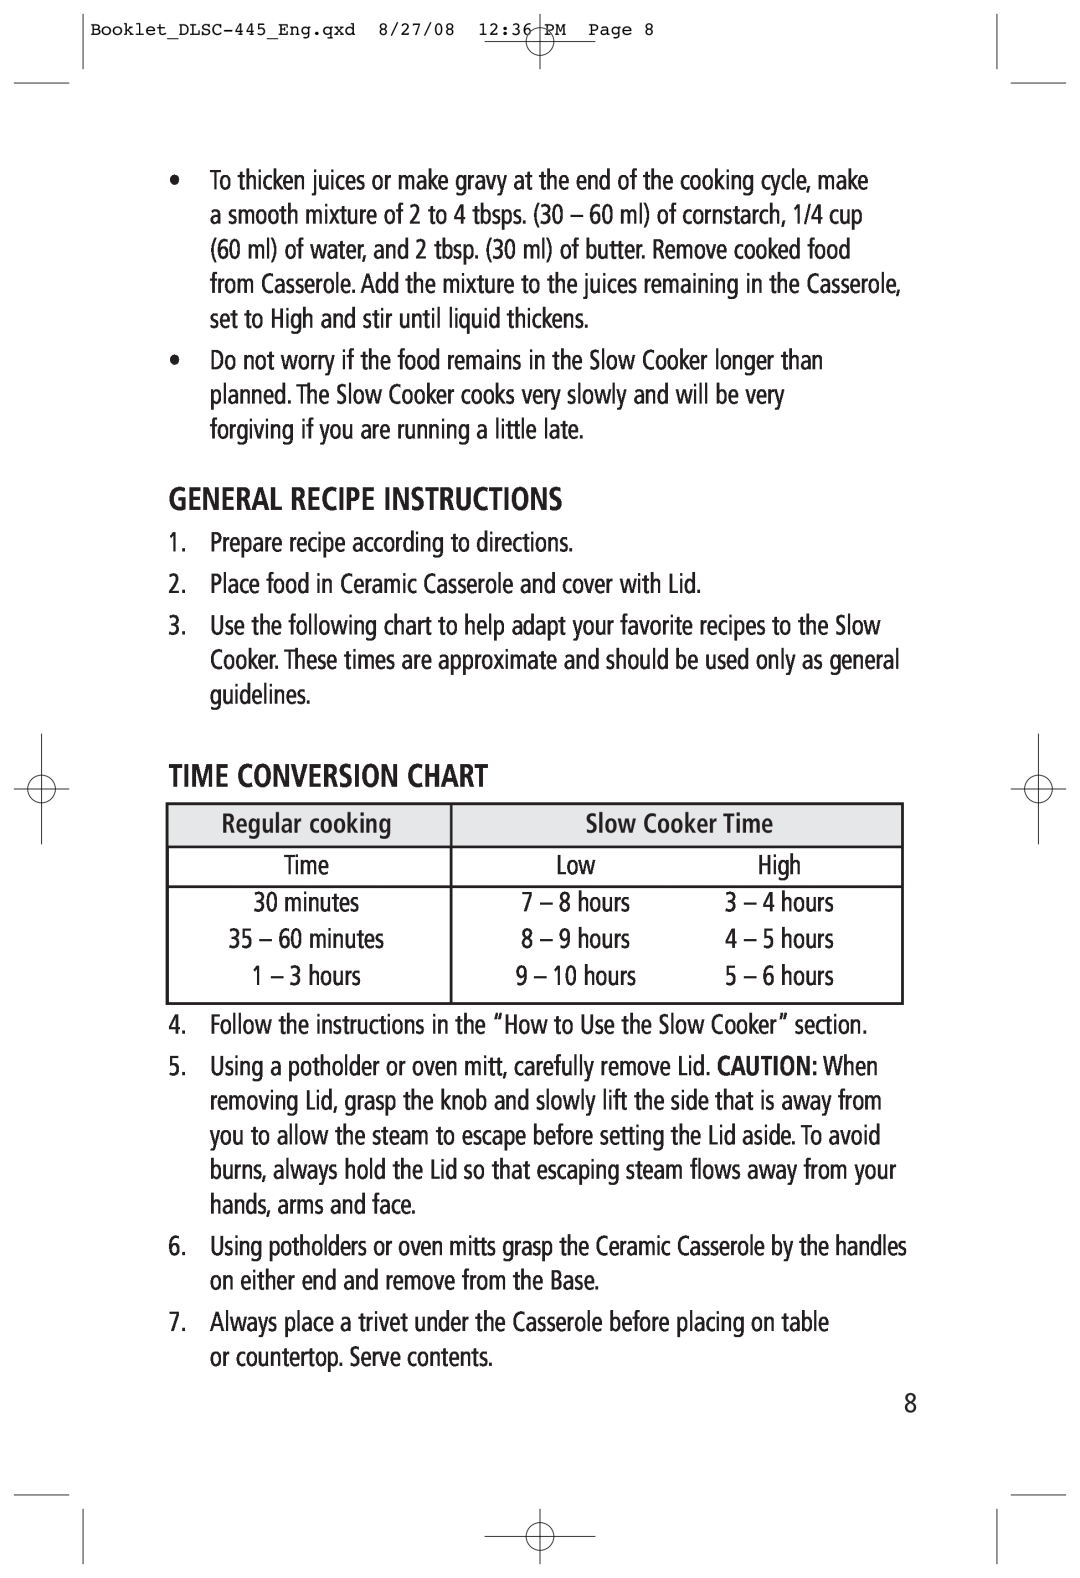 Toastess DLSC-445 manual General Recipe Instructions, Time Conversion Chart, Regular cooking, Slow Cooker Time 